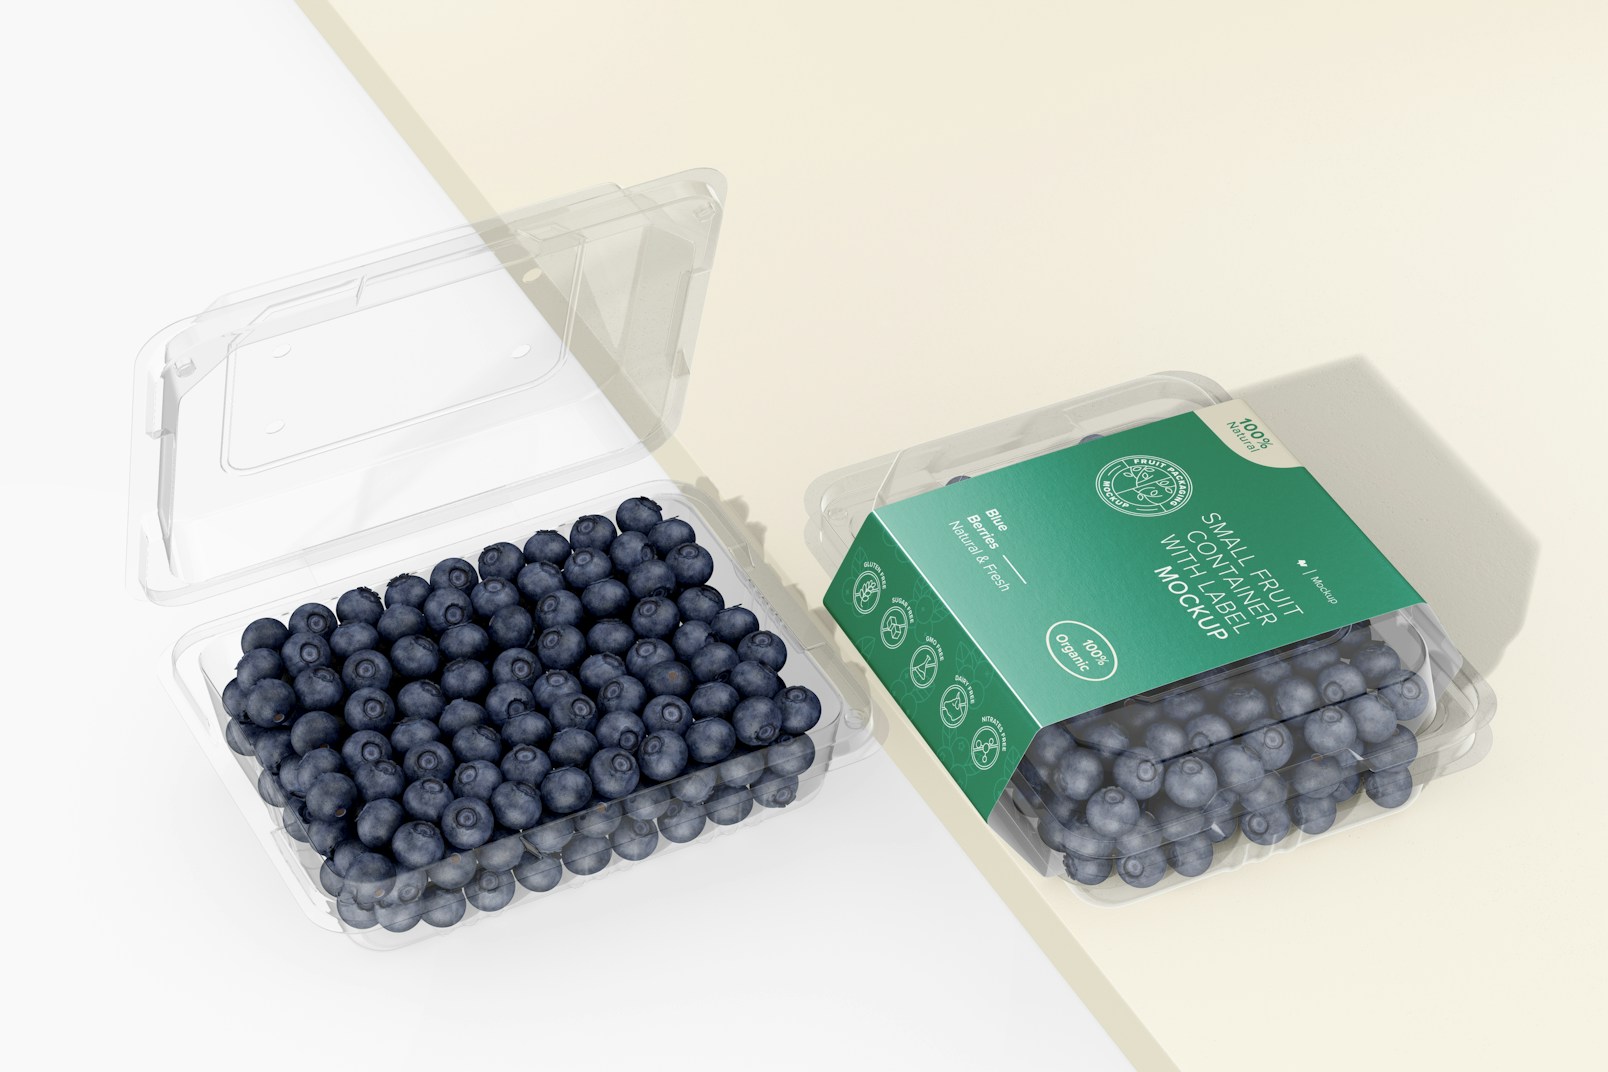 Small Fruit Containers with Label Mockup